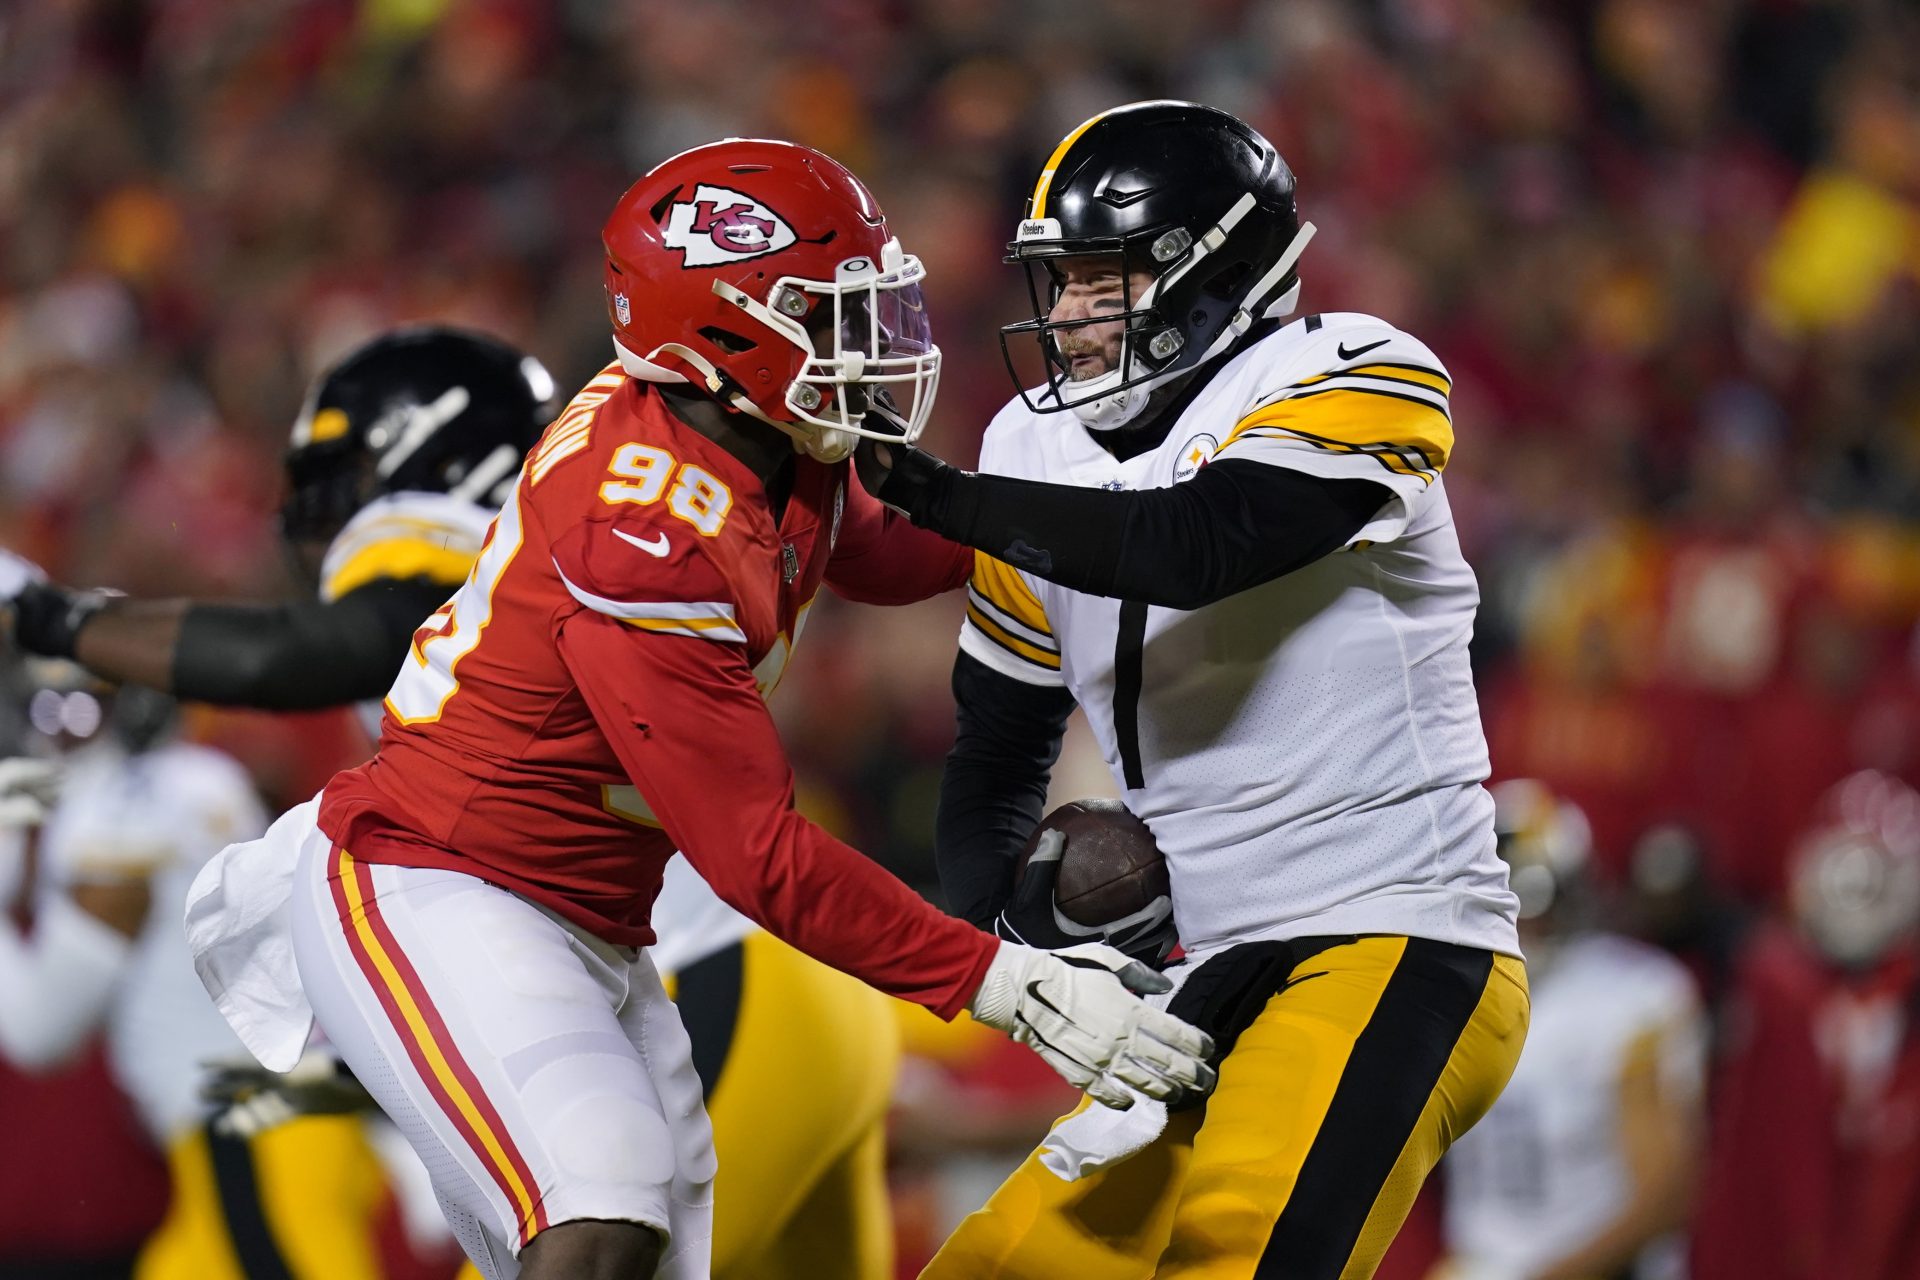 Pittsburgh Steelers quarterback Ben Roethlisberger (7) is sacked by Kansas City Chiefs defensive end Tershawn Wharton (98) during the first half of an NFL wild-card playoff football game, Sunday, Jan. 16, 2022, in Kansas City, Mo.